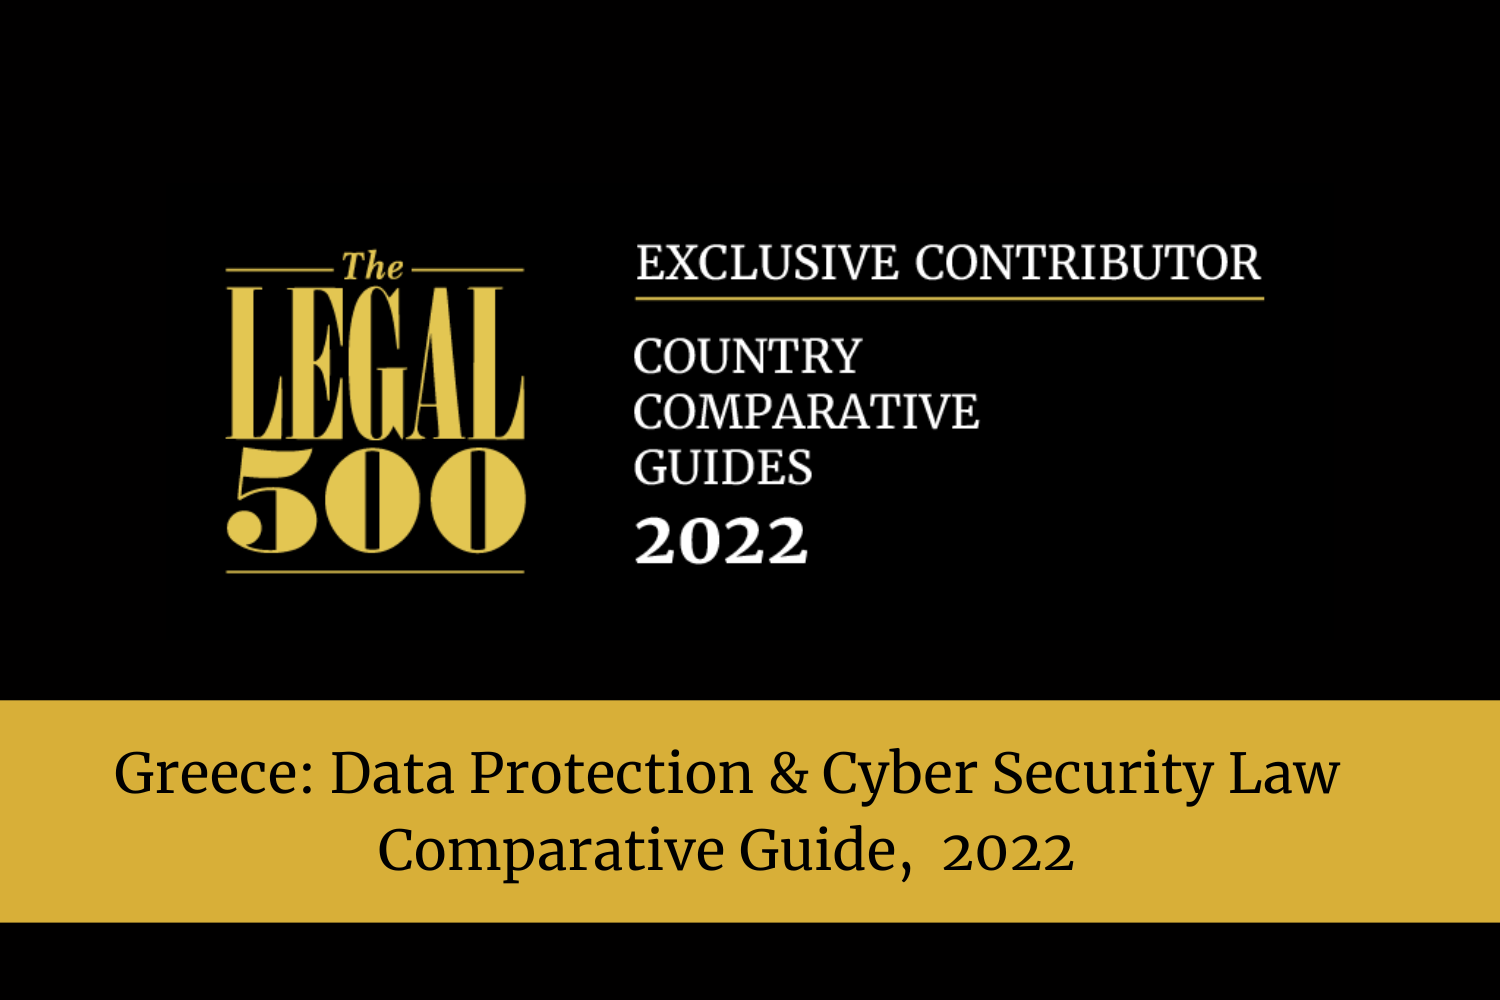 Andersen Legal: Exclusive contributor to The Legal 500 Data Protection and Cyber Security Comparative Guide, 2022